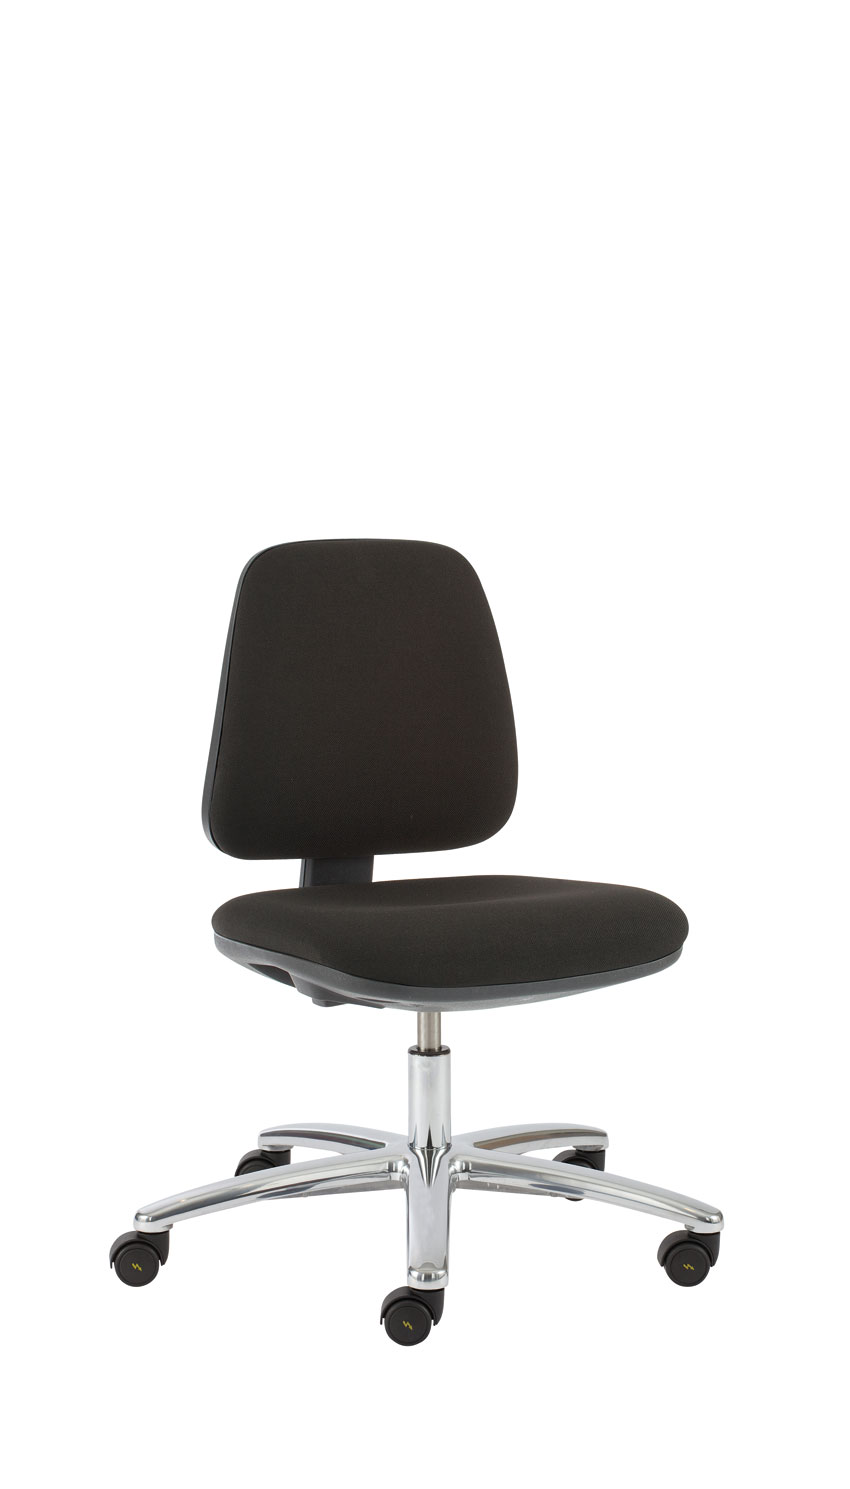 ANTISTATIC CHAIR ON ESD CASTORS